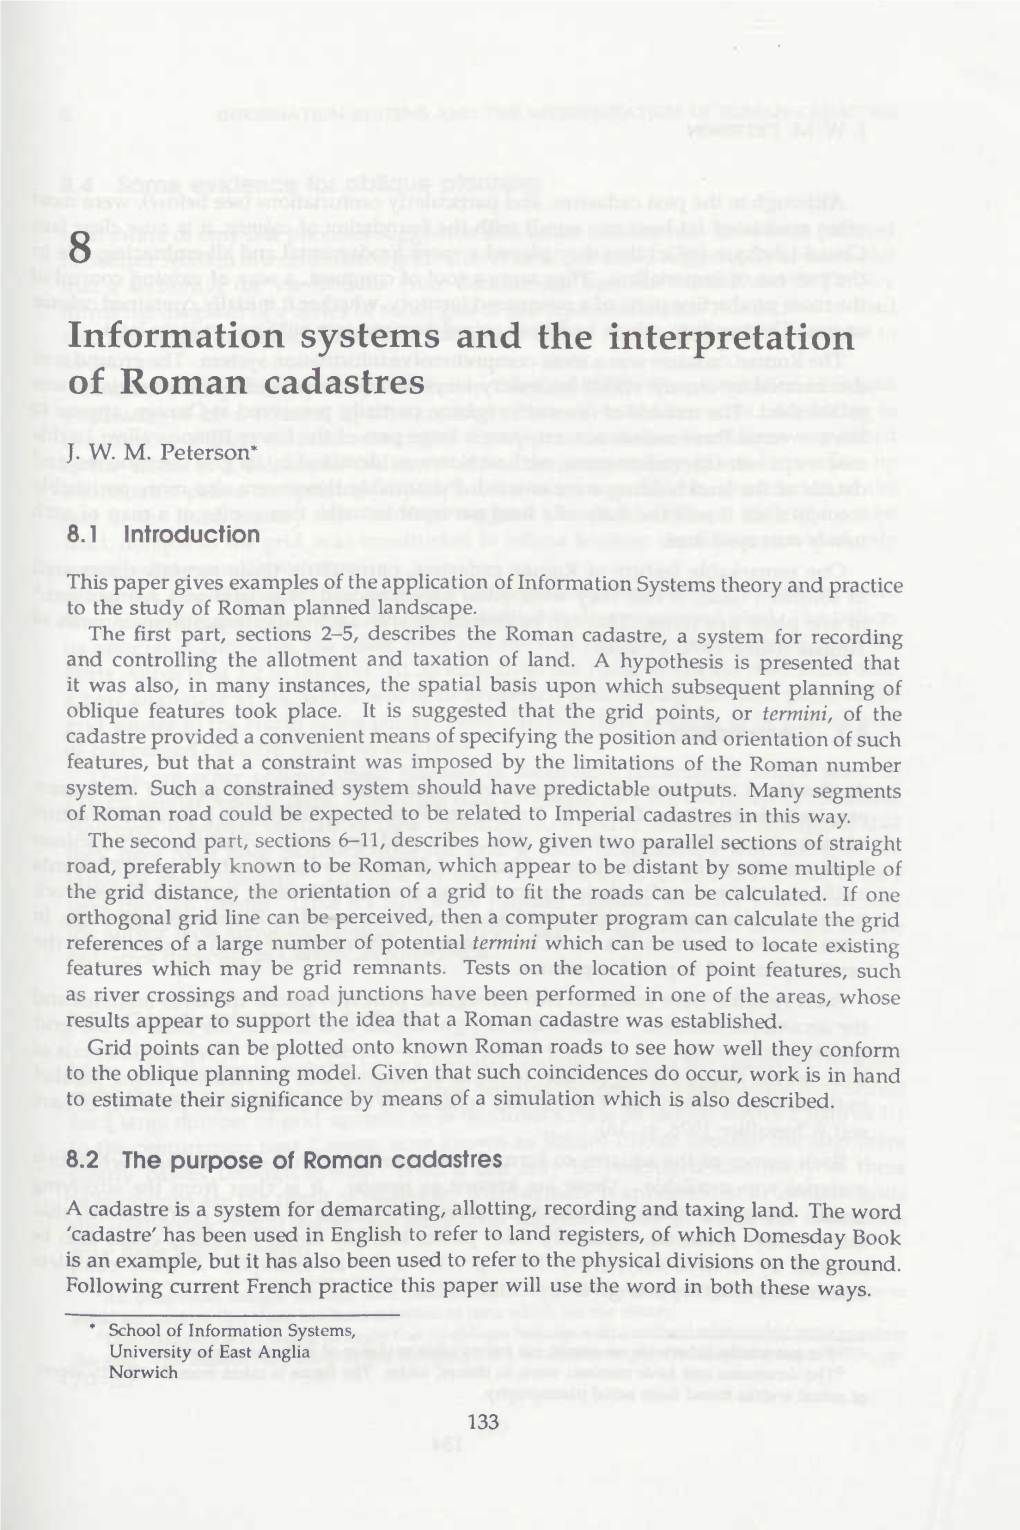 Information Systems and the Interpretation of Roman Cadastres